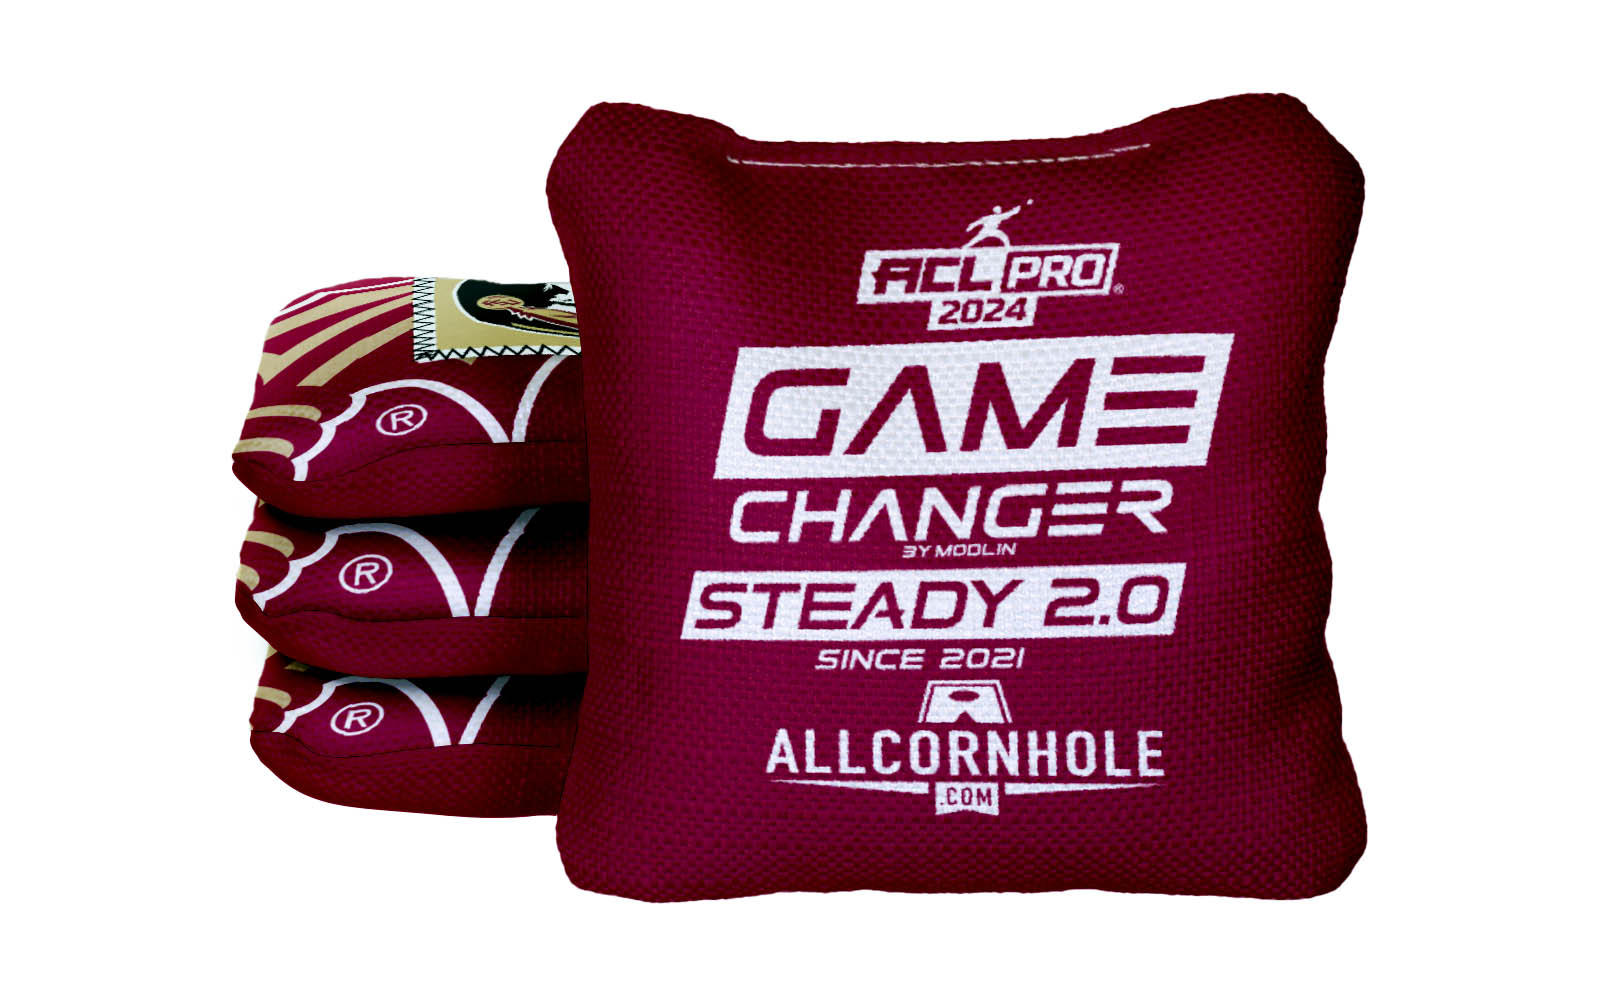 Officially Licensed Collegiate Cornhole Bags - Gamechanger Steady 2.0 - Set of 4 - Florida State University